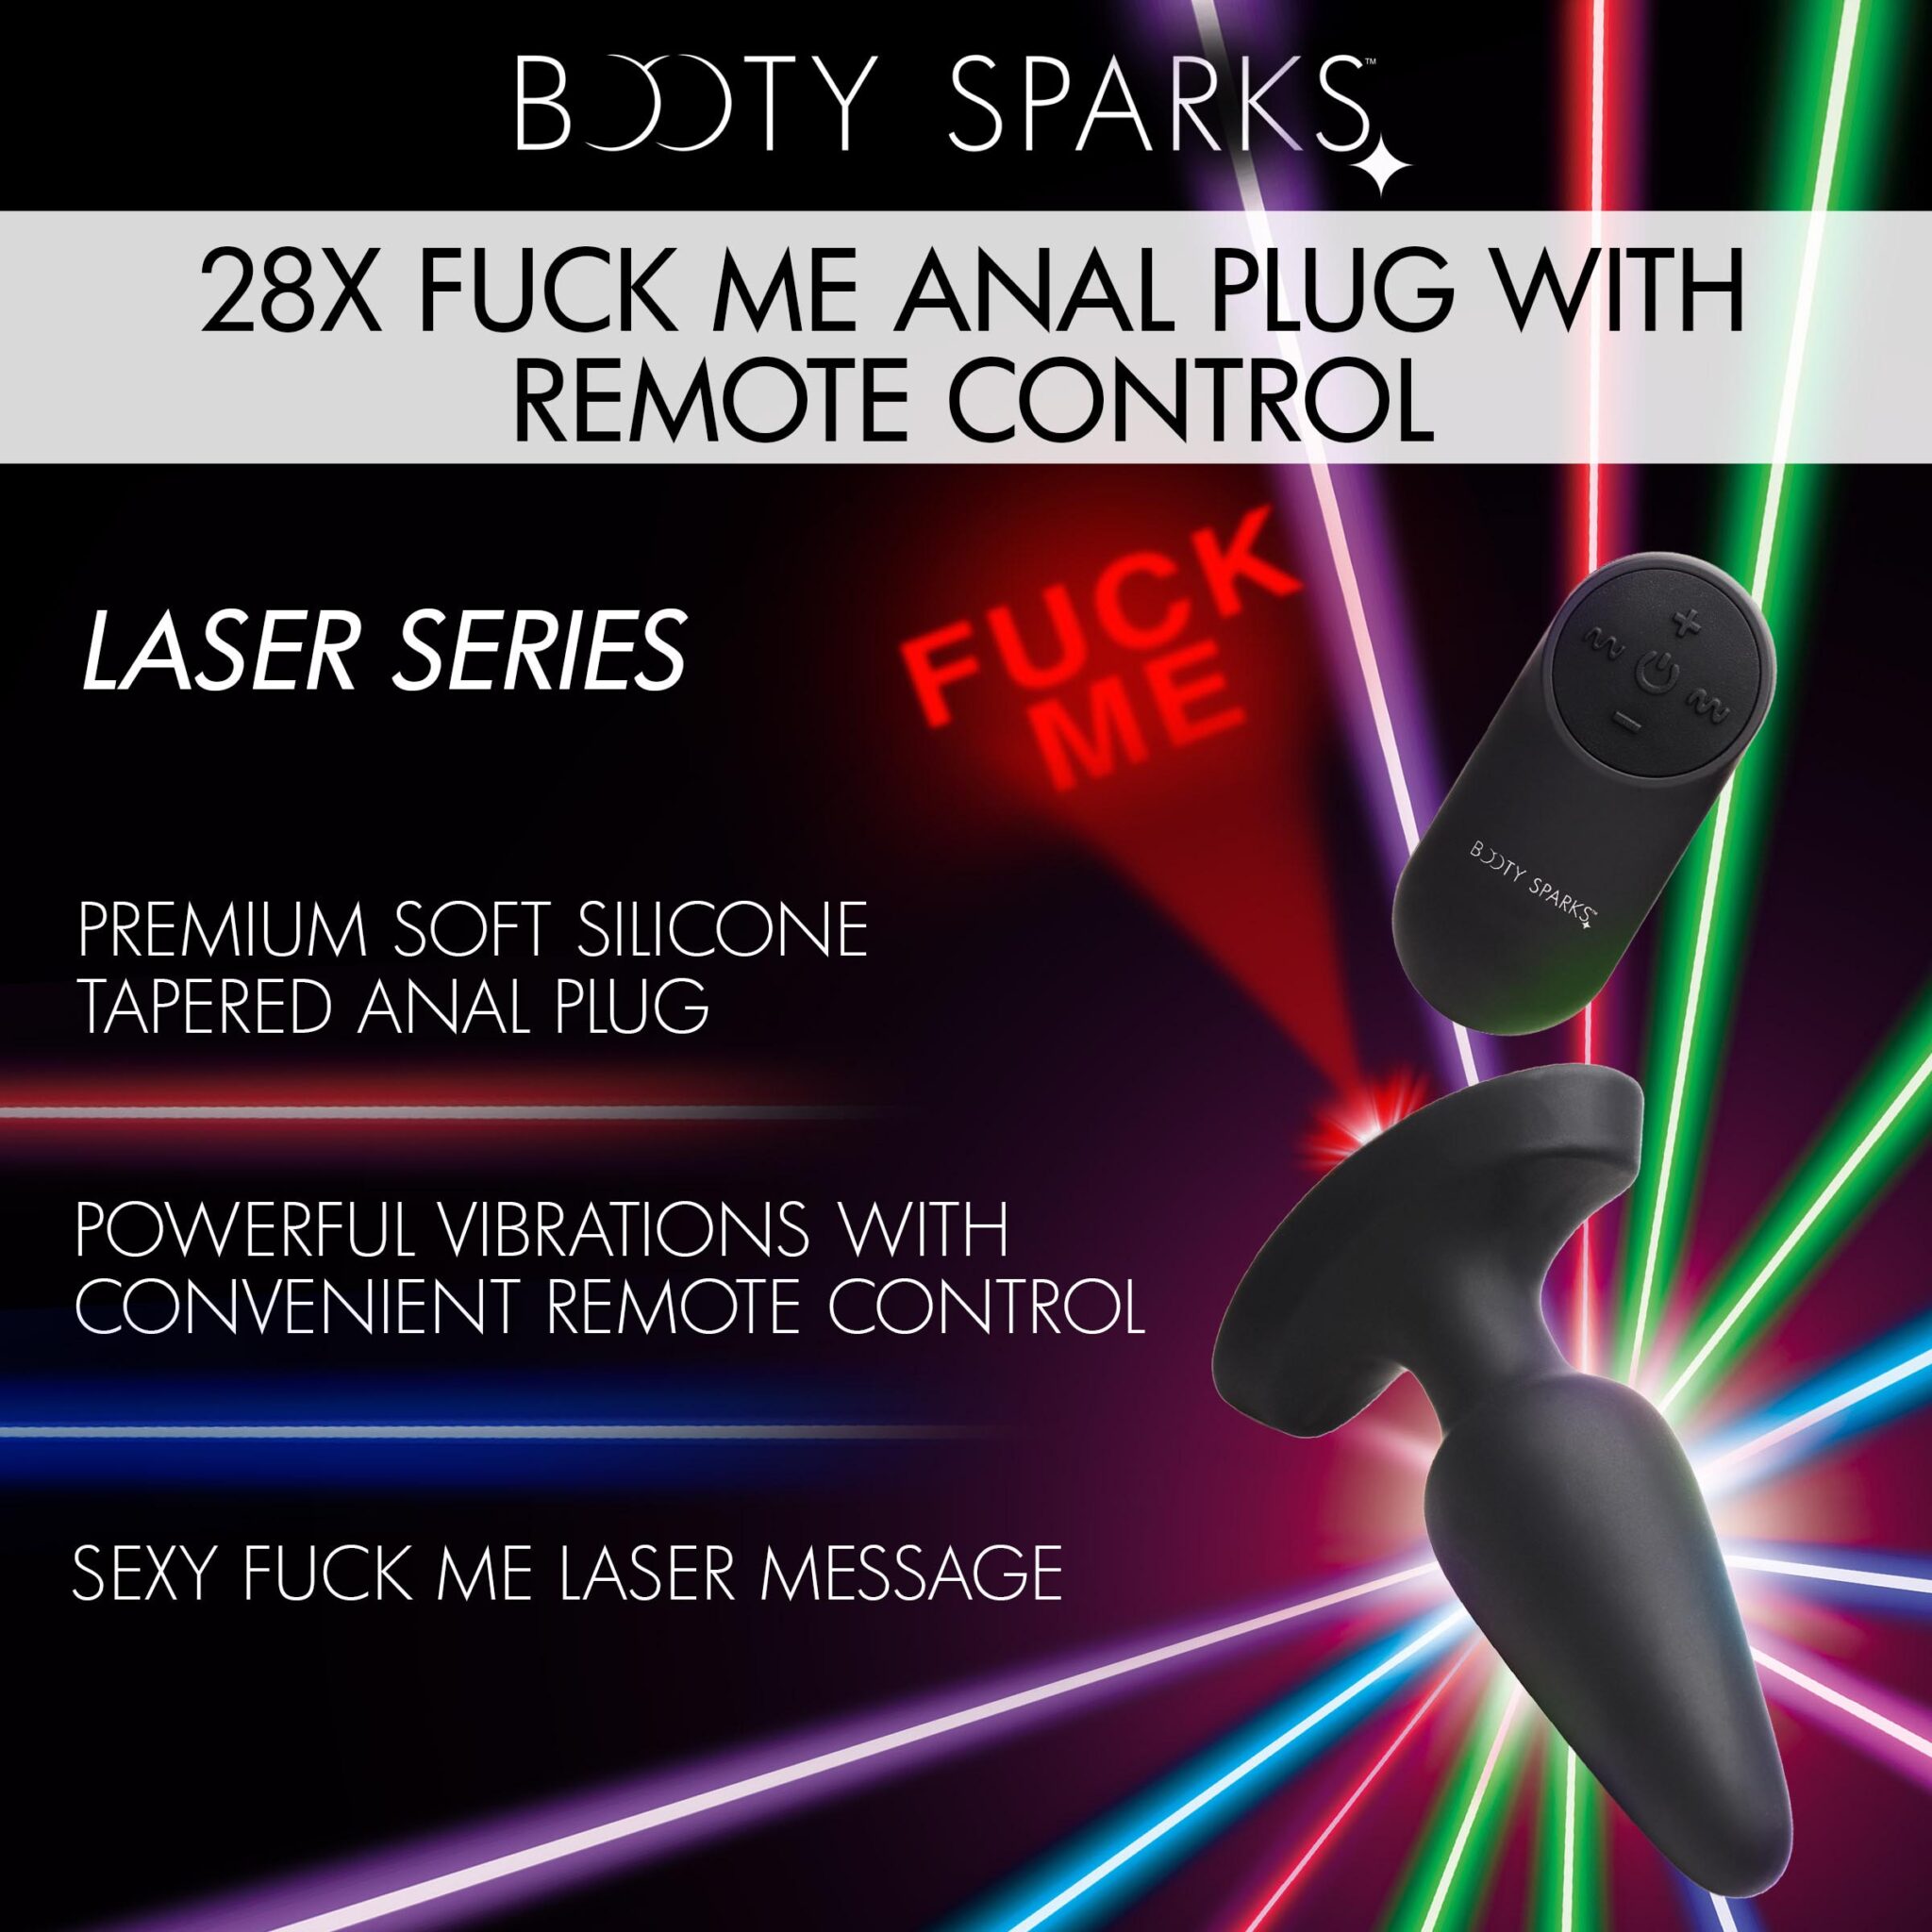 28X Laser Fuck Me Silicone Anal Plug with Remote Control – Large